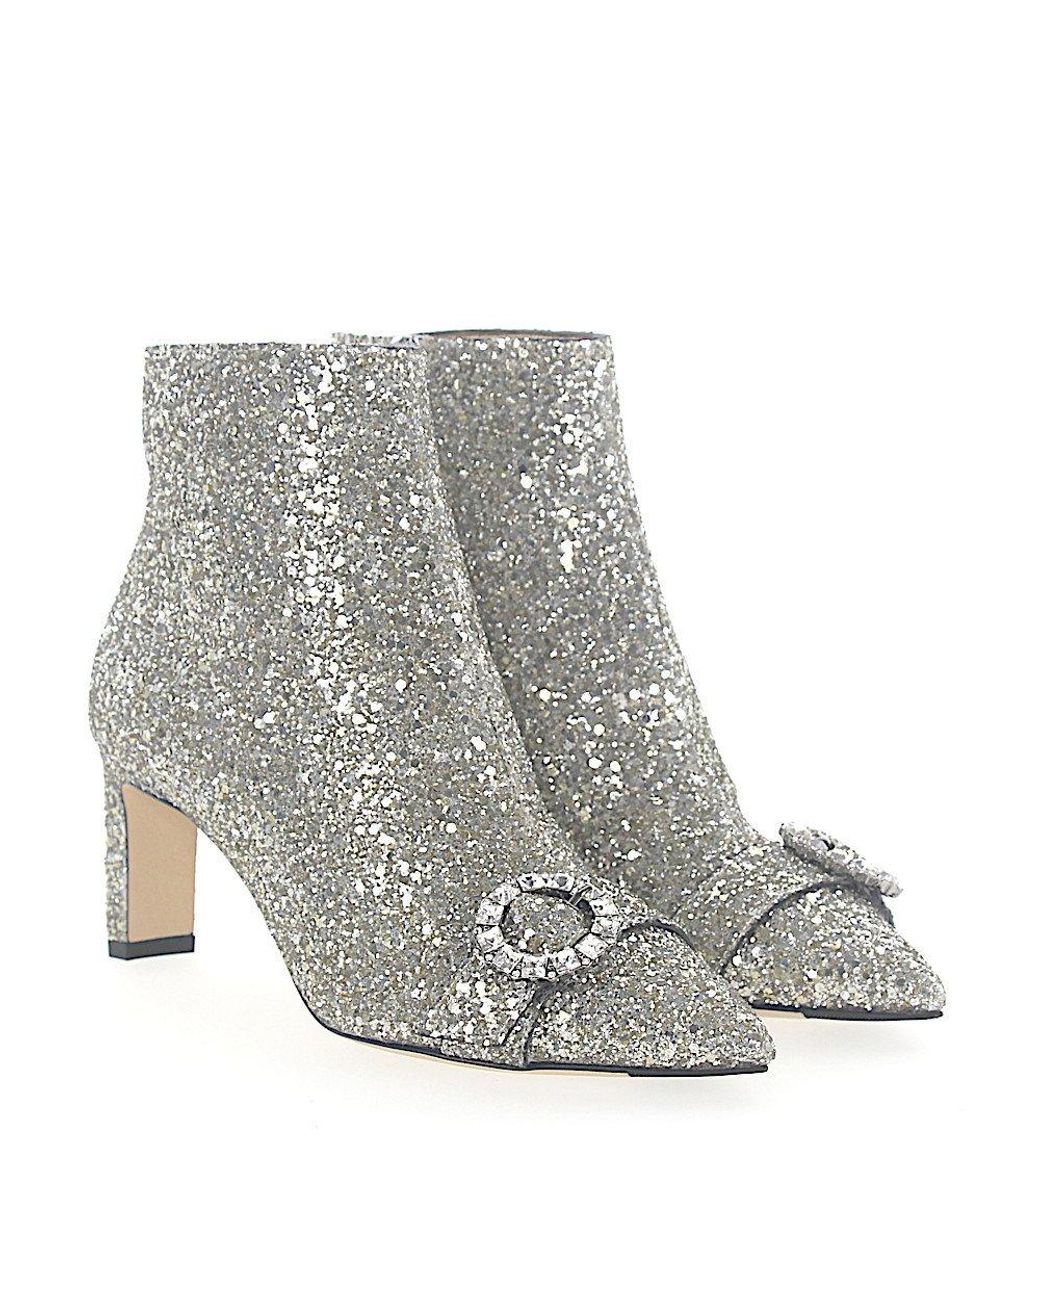 Jimmy Choo Boots Hanover 65 Fabric Glitter Silver Buckle in Gray